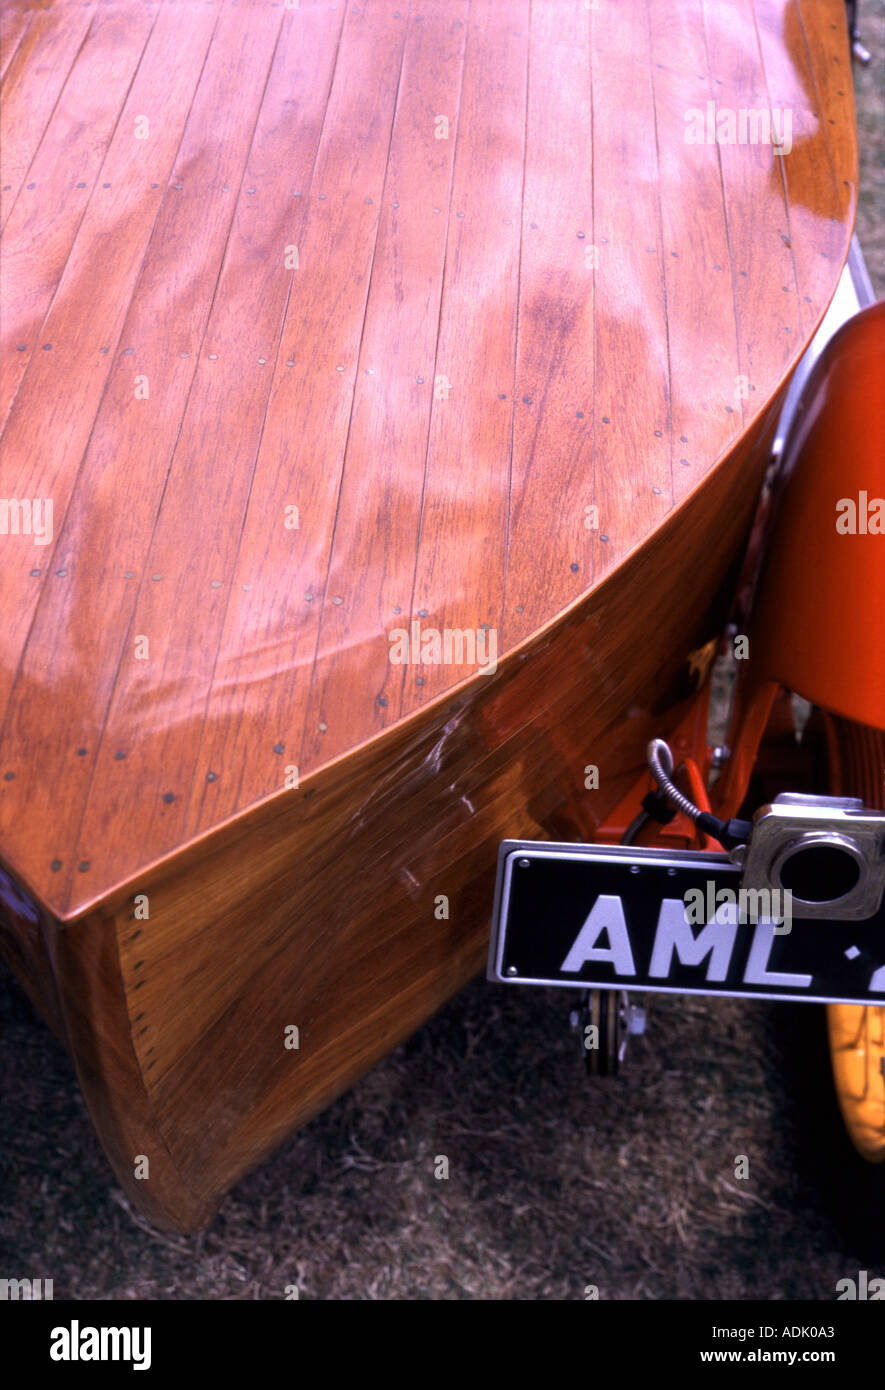 tail of amilcar made of wood in the style of a boat Stock Photo